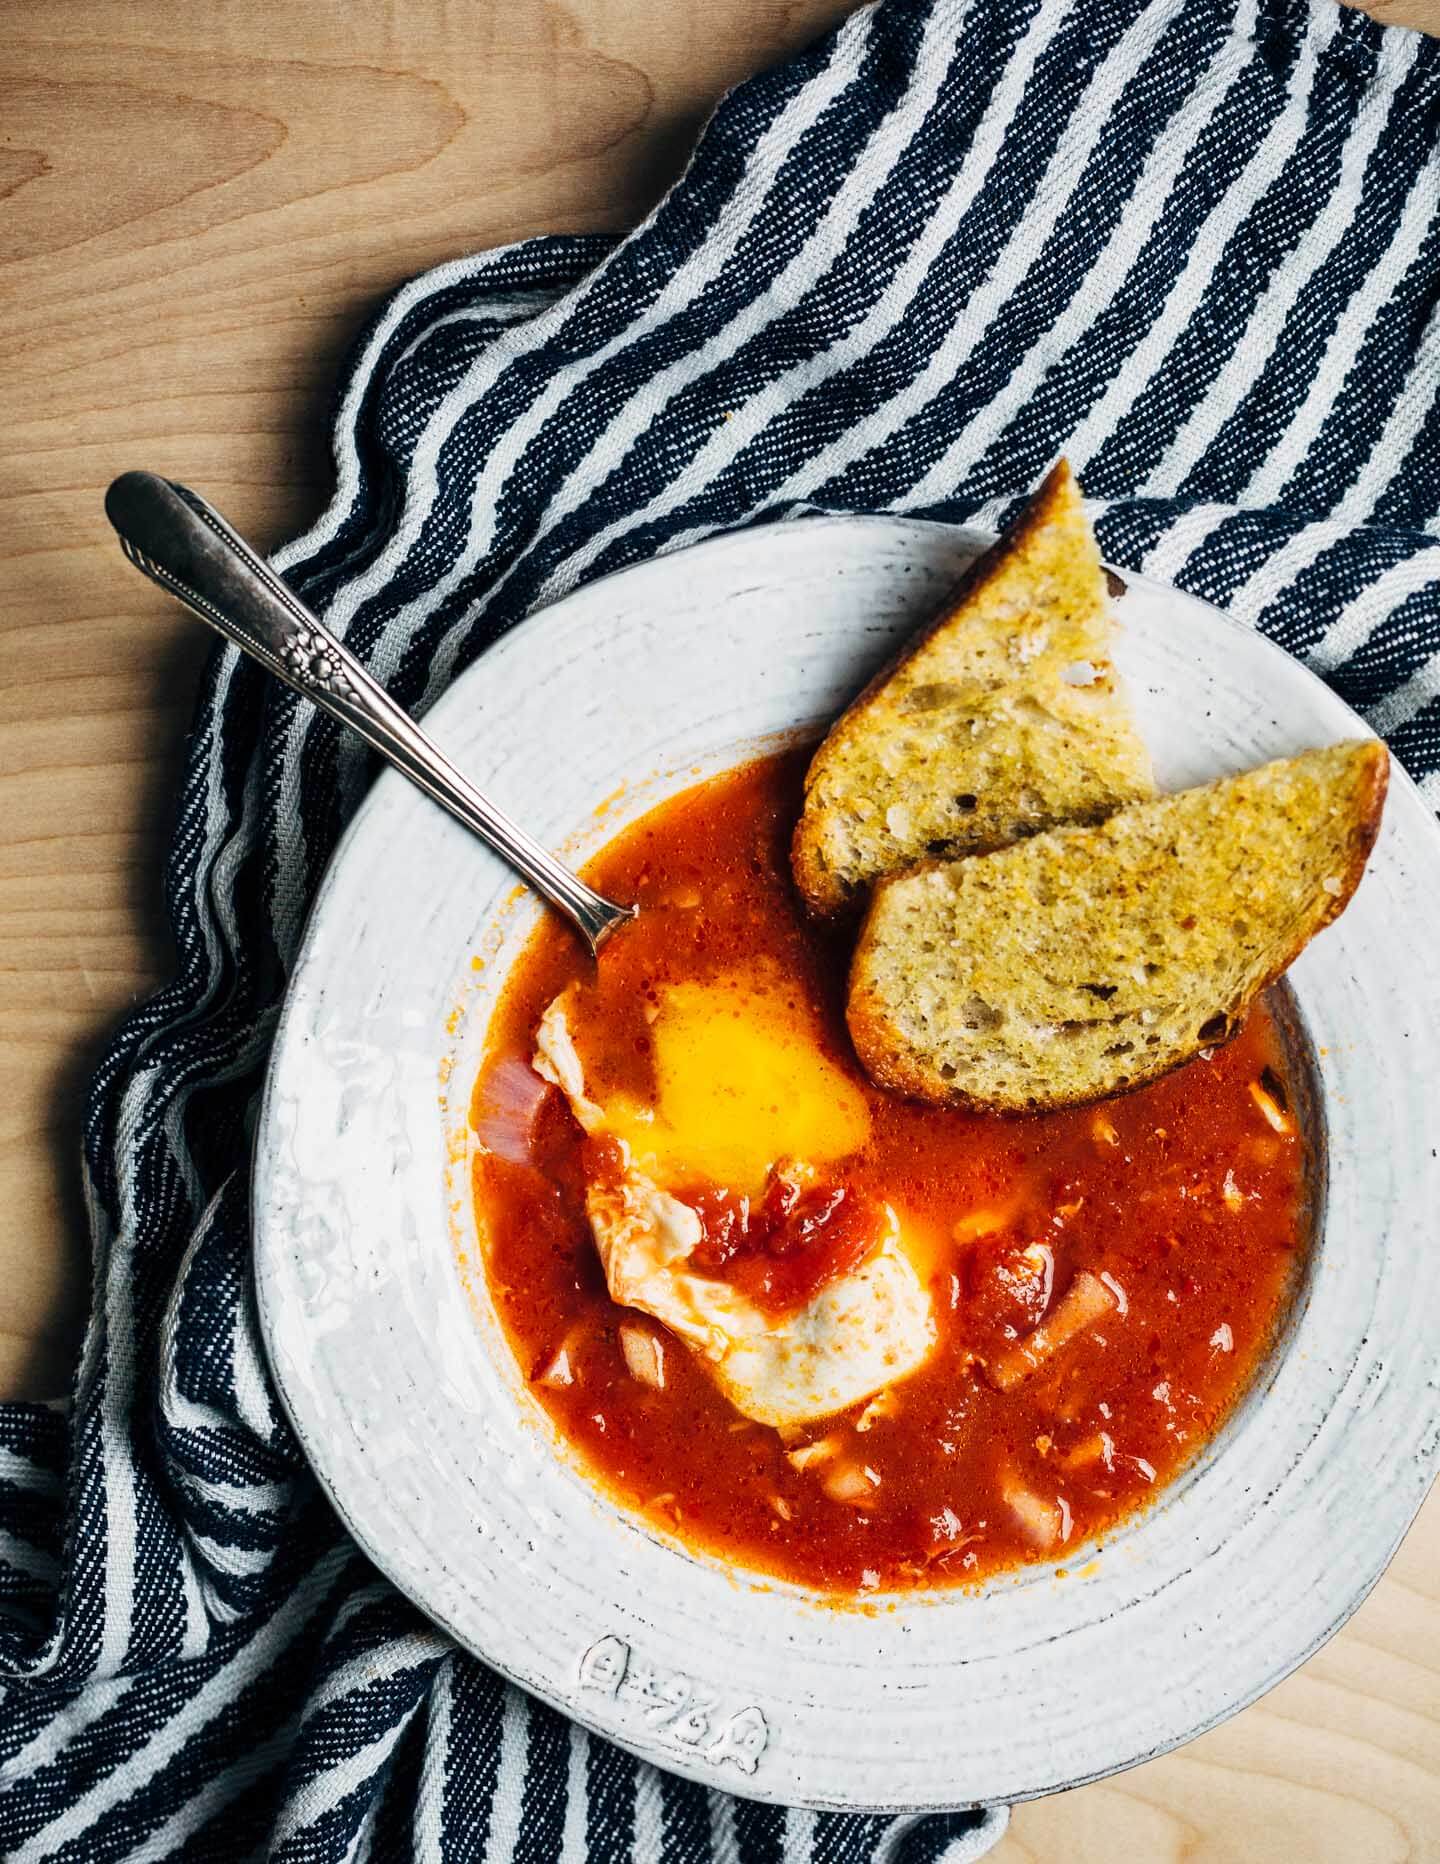 A simple tomato soup with poached eggs that can be as easy or as complex as you'd like. This one has harissa for heat and a little crunch from pickled onions. Golden, garlicky croutons are extra, but so delicious. 